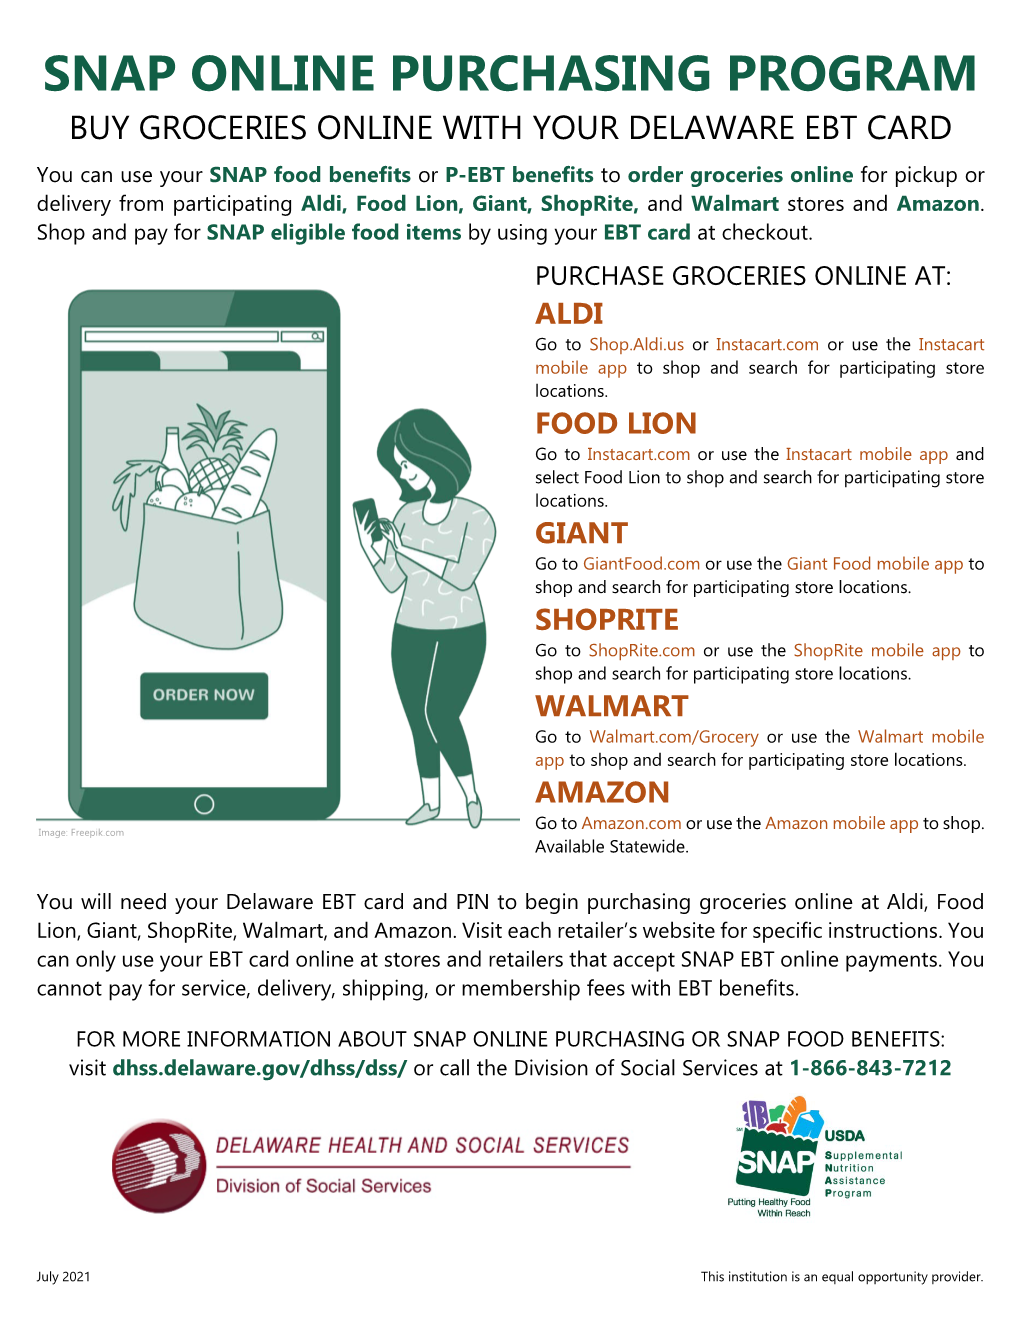 Snap Online Purchasing Program Buy Groceries Online with Your Delaware Ebt Card